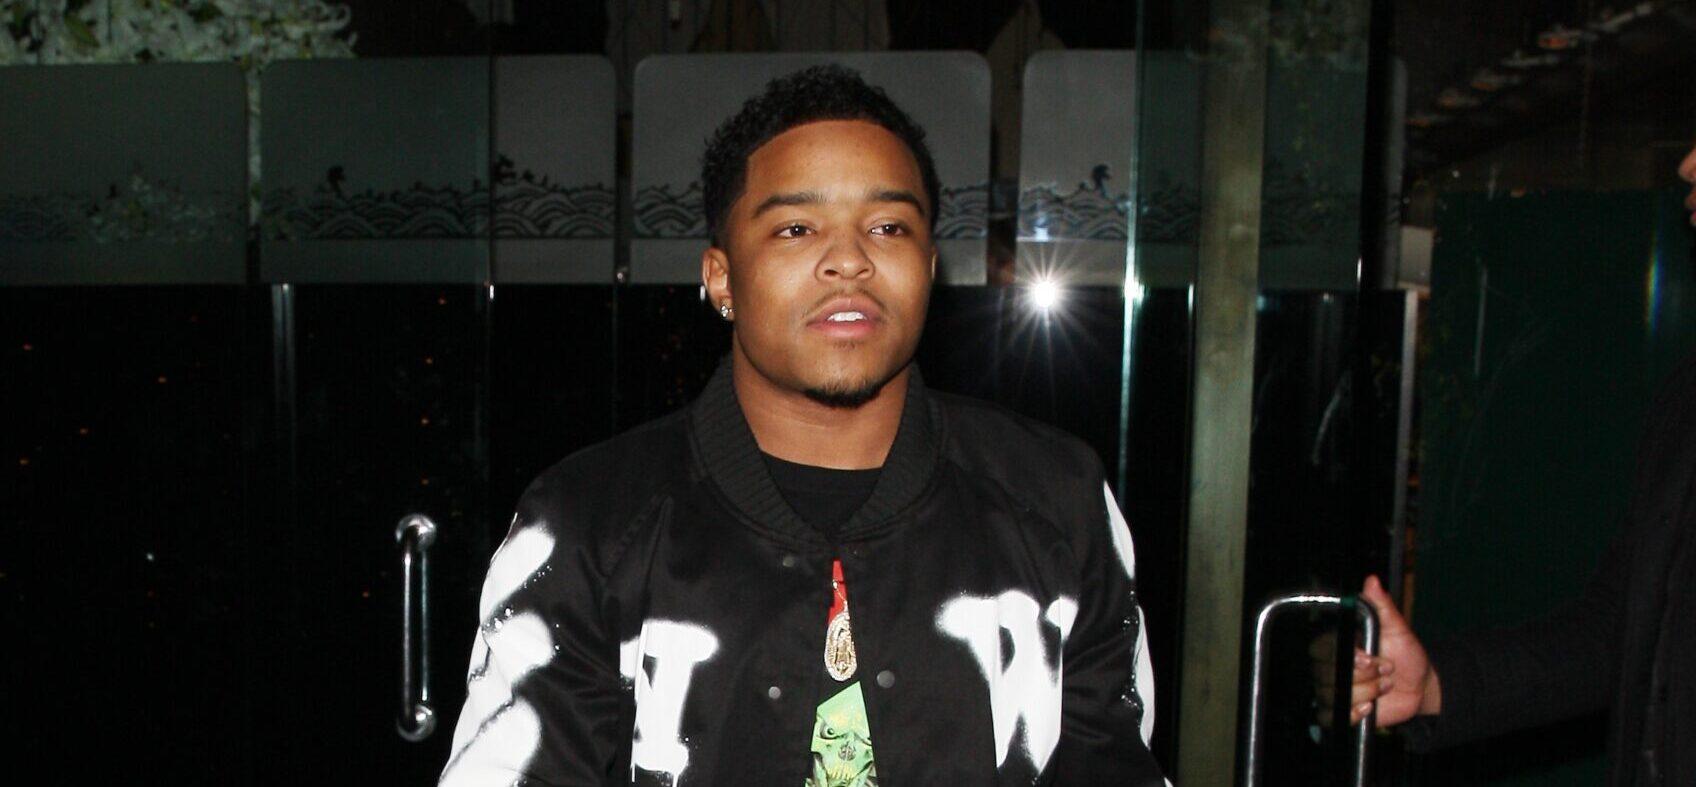 Diddy’s Son Justin Combs Avoids Jail Time In DUI Plea Deal